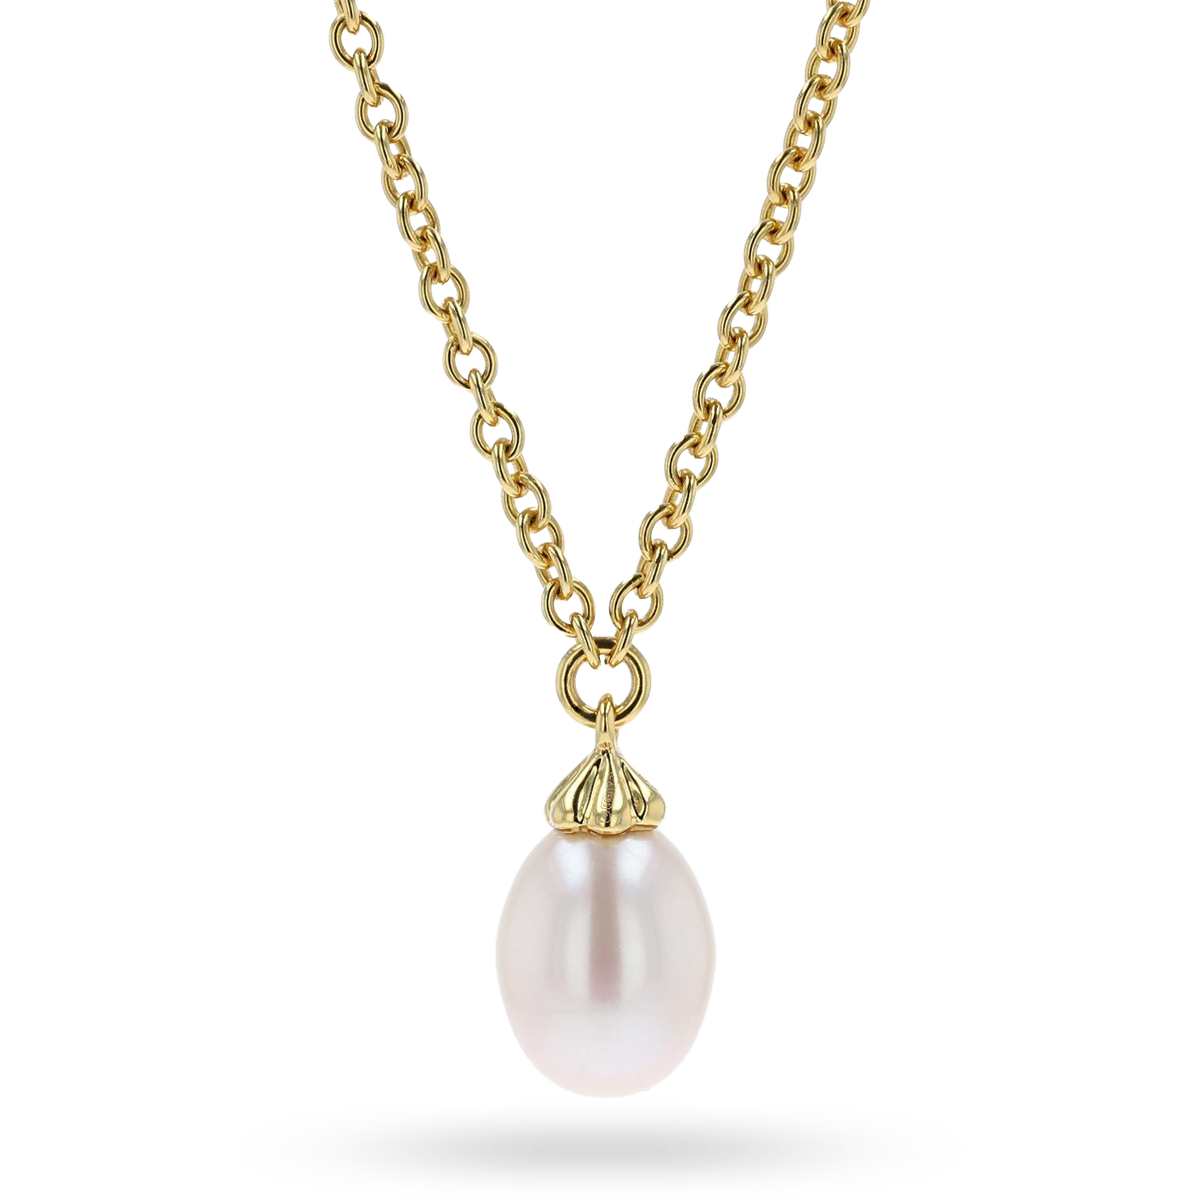 Trollbeads 14ct Yellow Gold Fantasy Necklace with Pearl